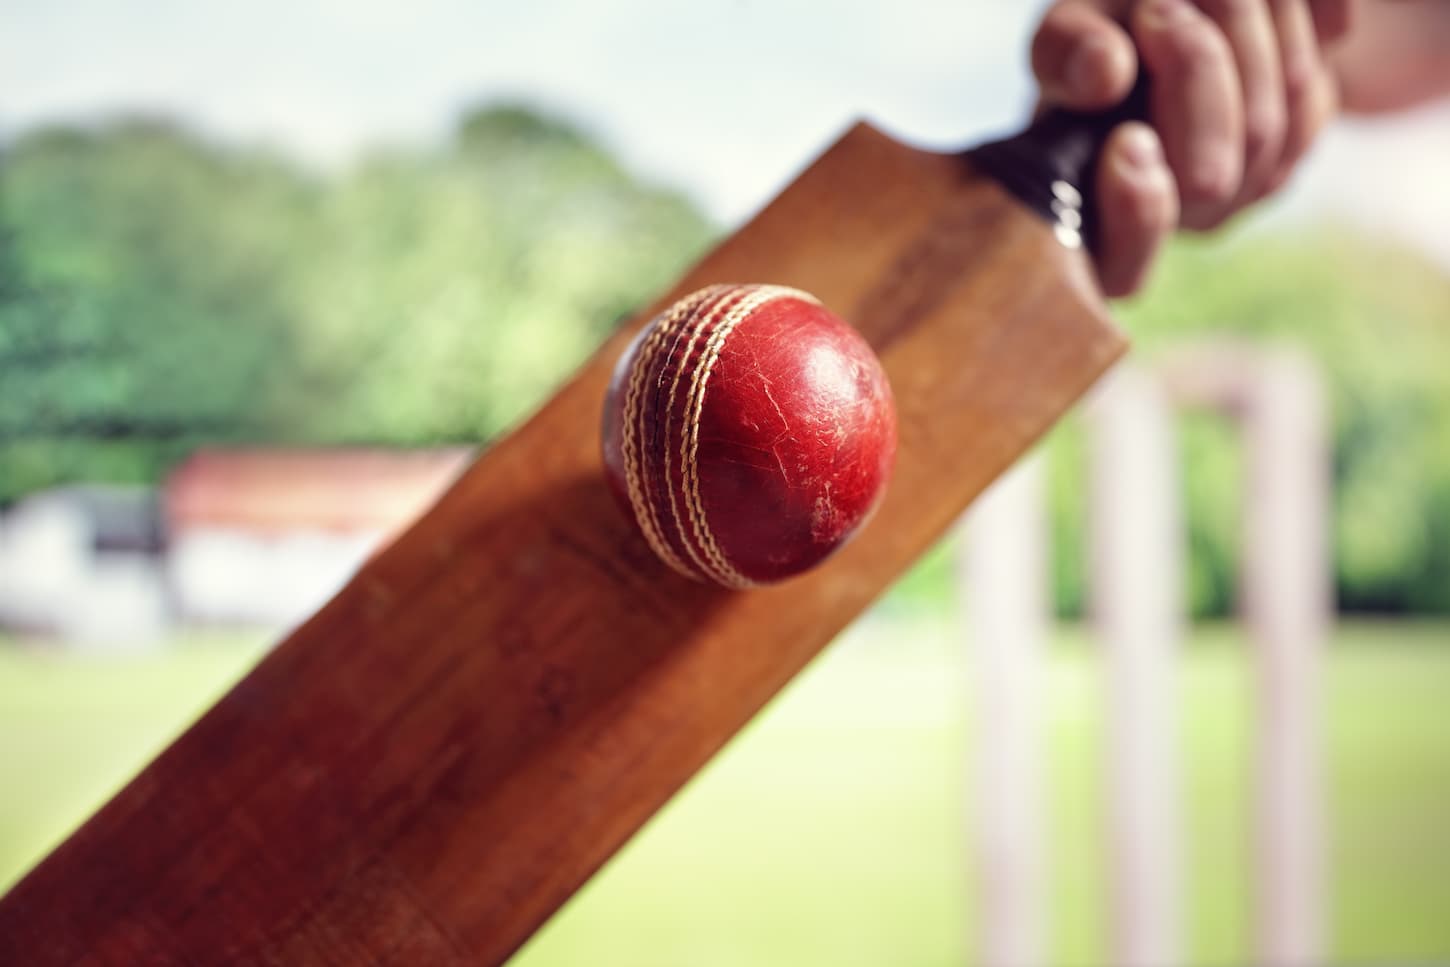 An image of a Cricket batsman hitting a ball shot from below with stumps on the cricket pitch.